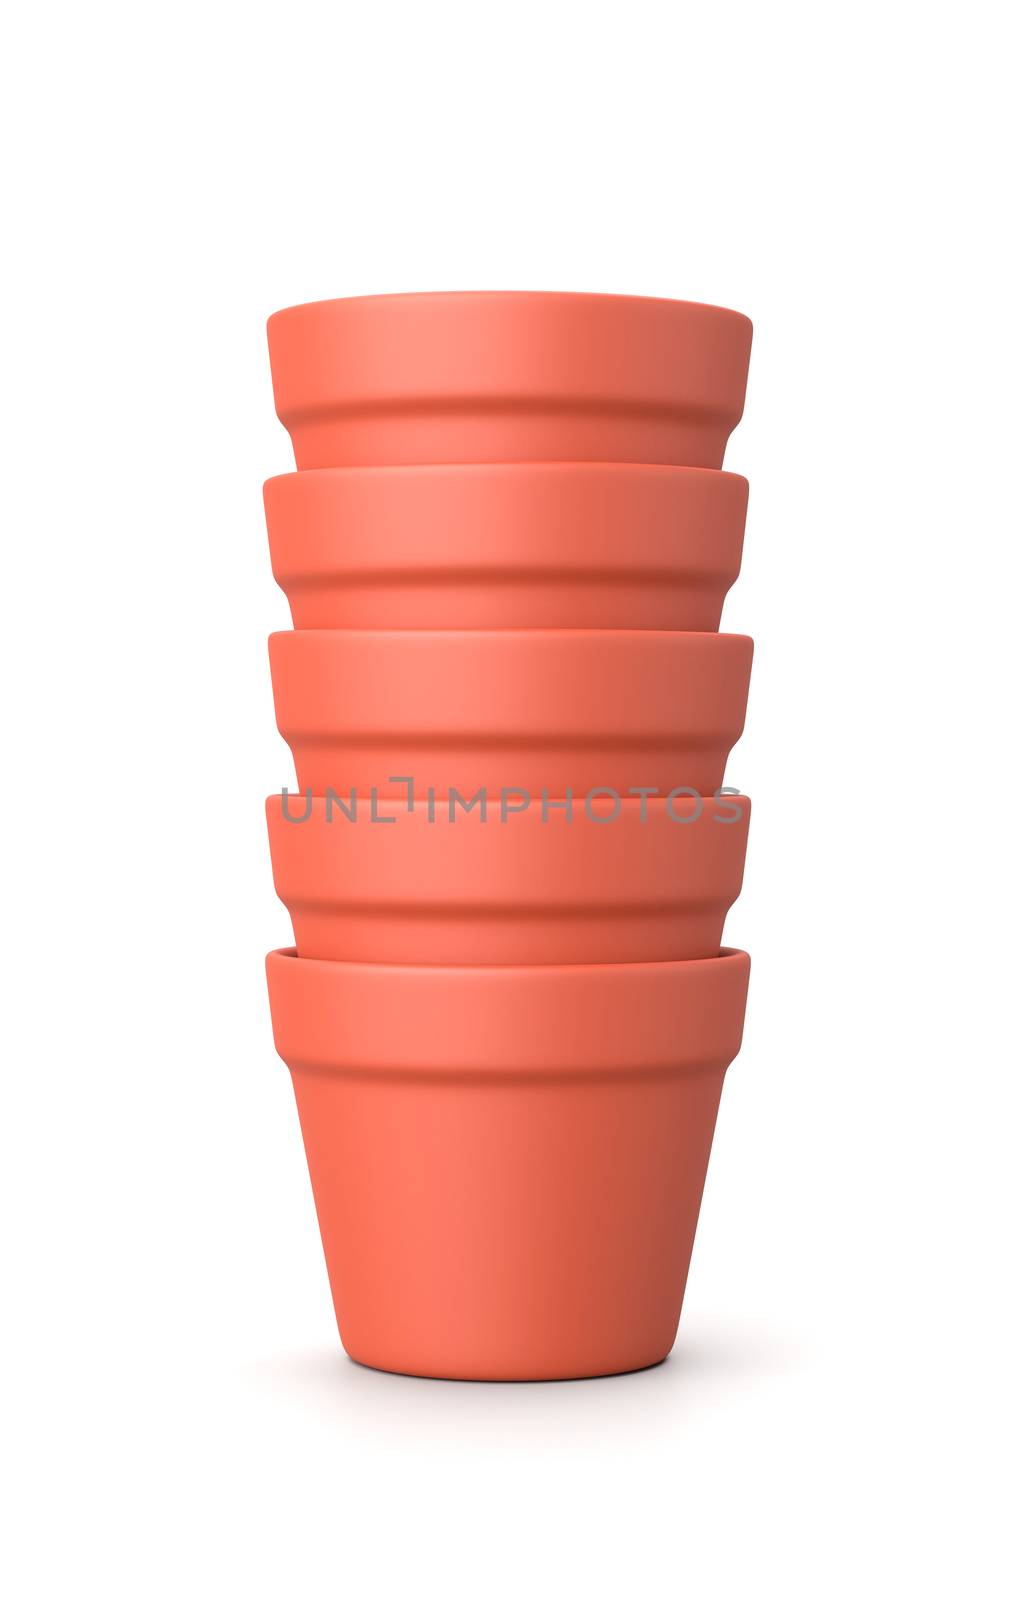 Stack of Earthenware Pots Isolated on White Background 3D Illustration